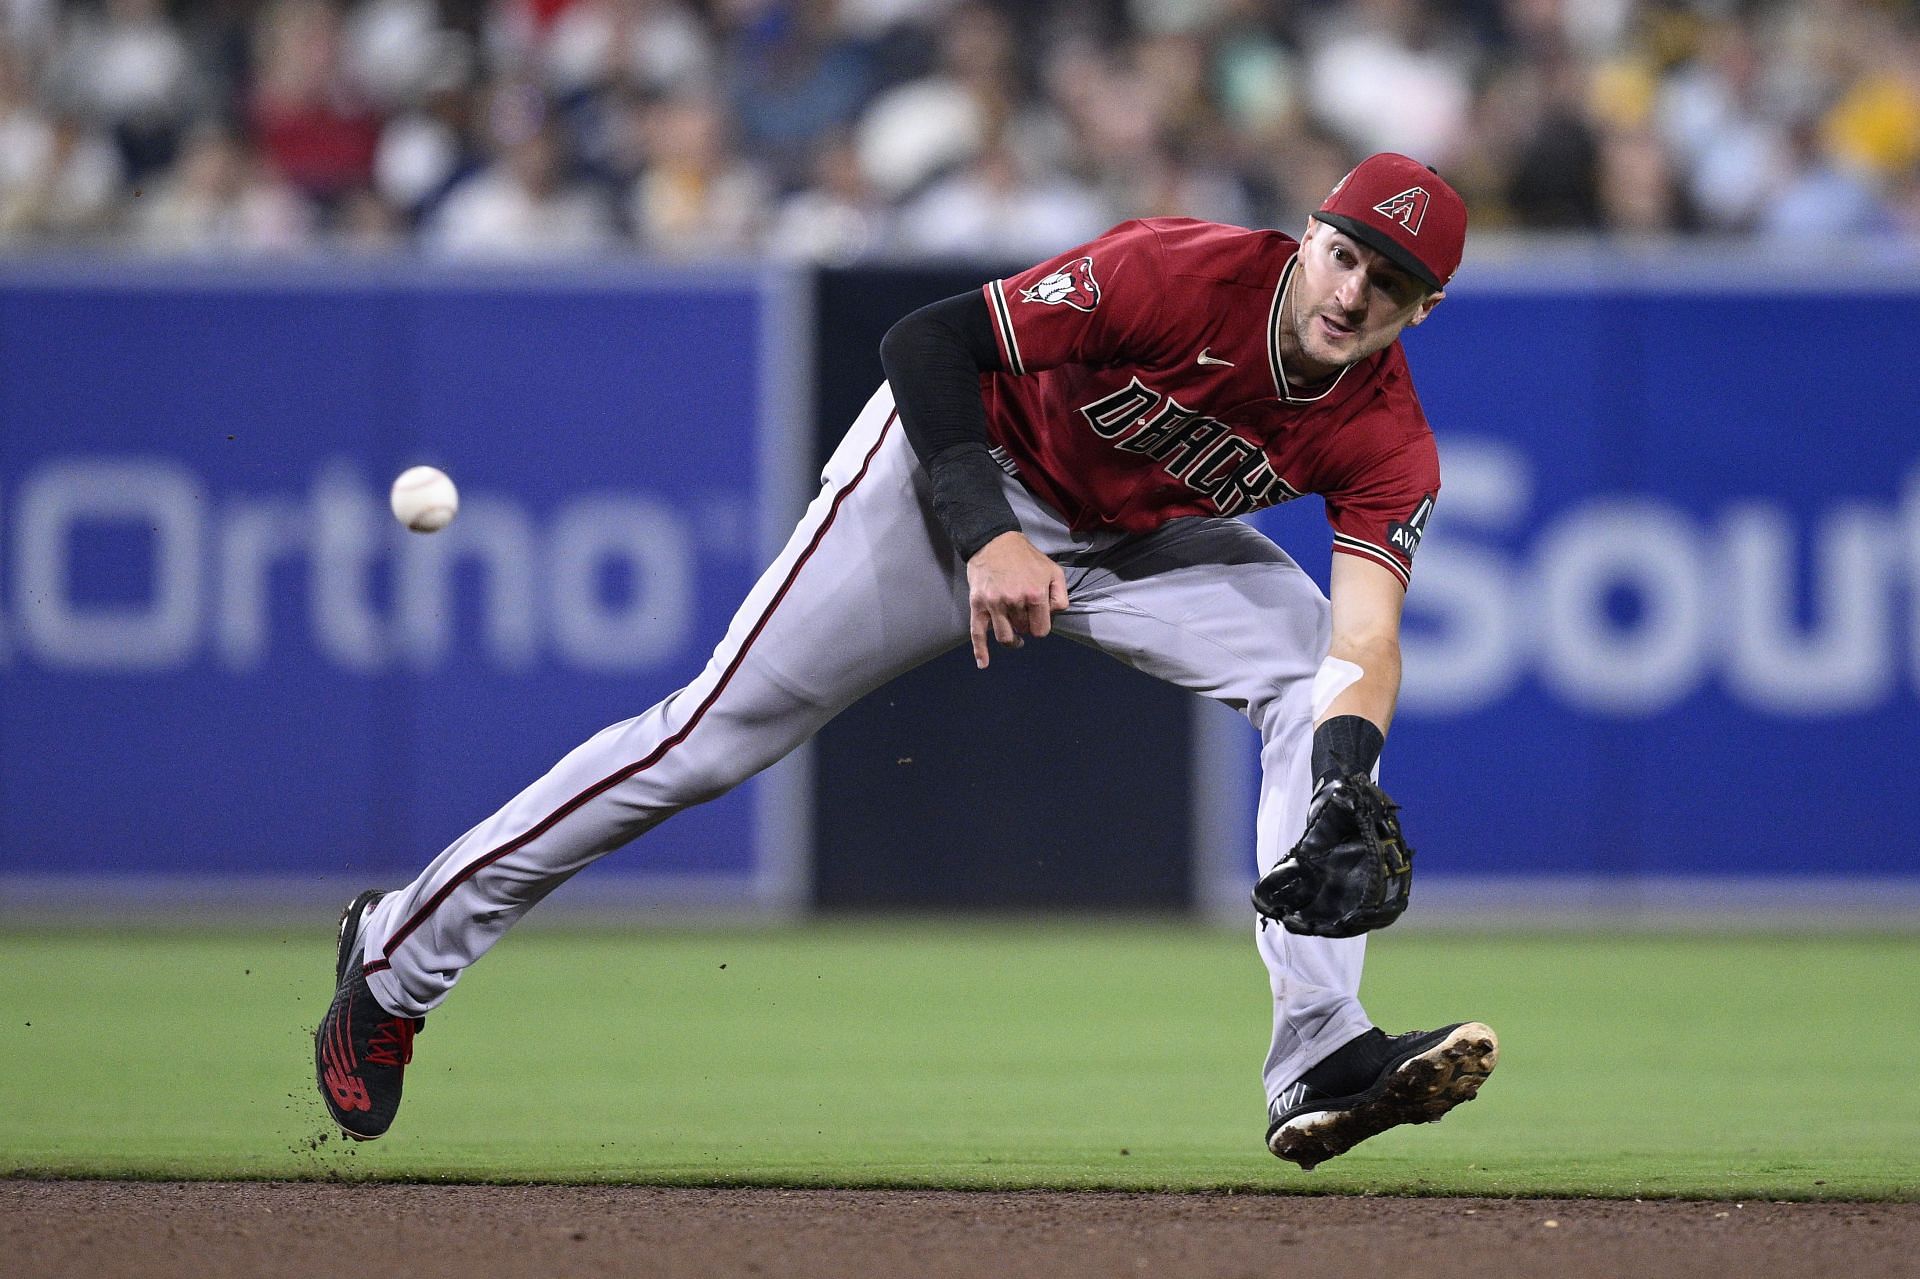 Nick Ahmed is on fire this spring